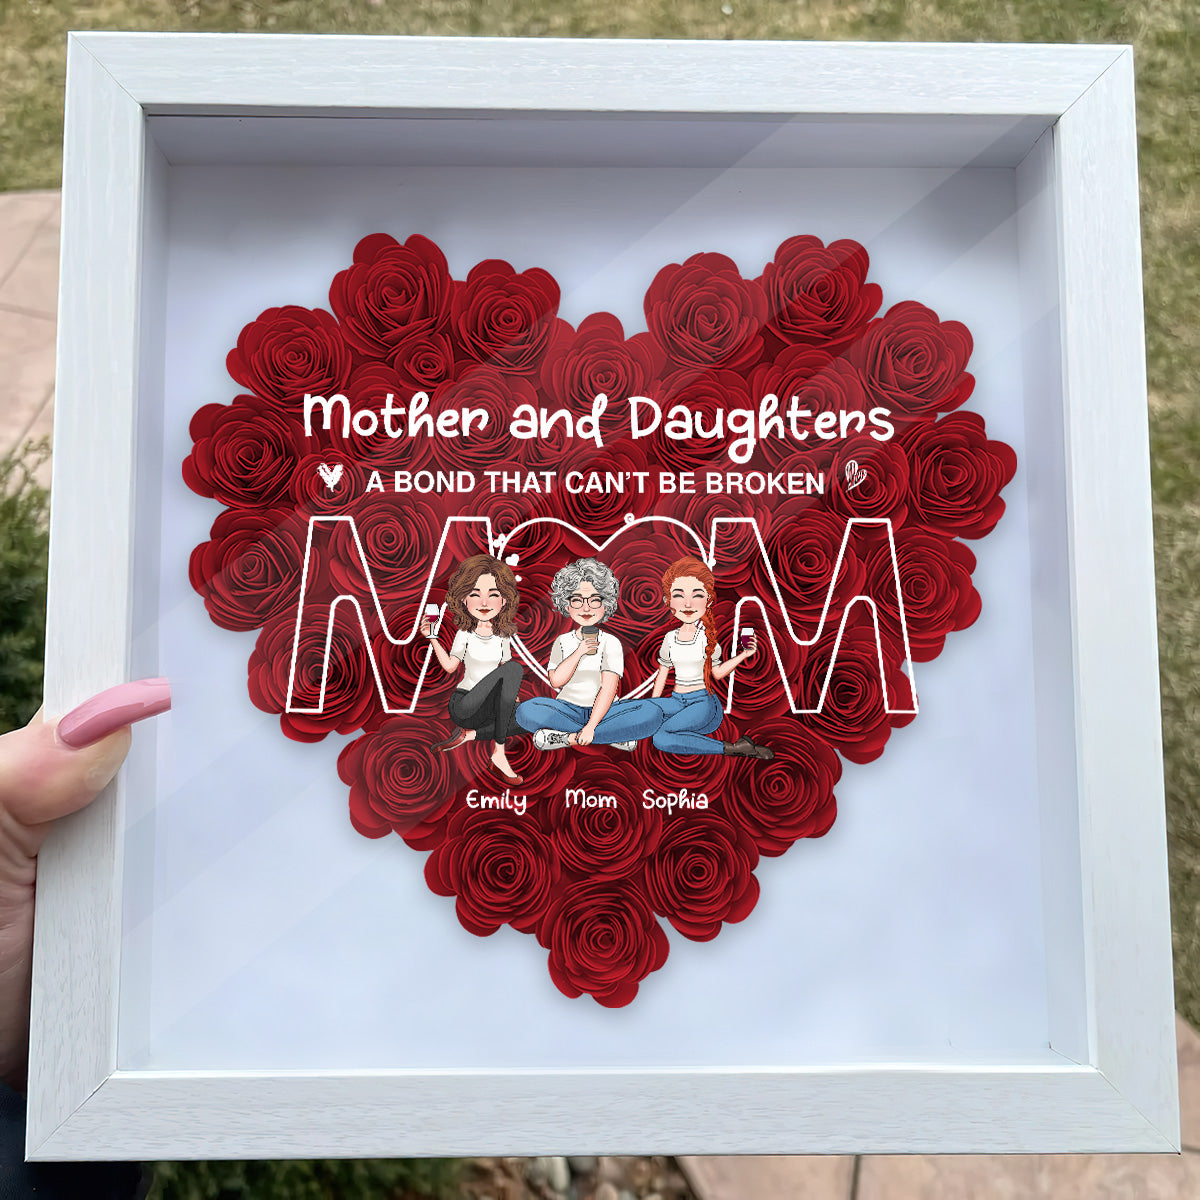 Discover A Bond That Can’t Be Broken - Personalized Mother Flower Frame Box